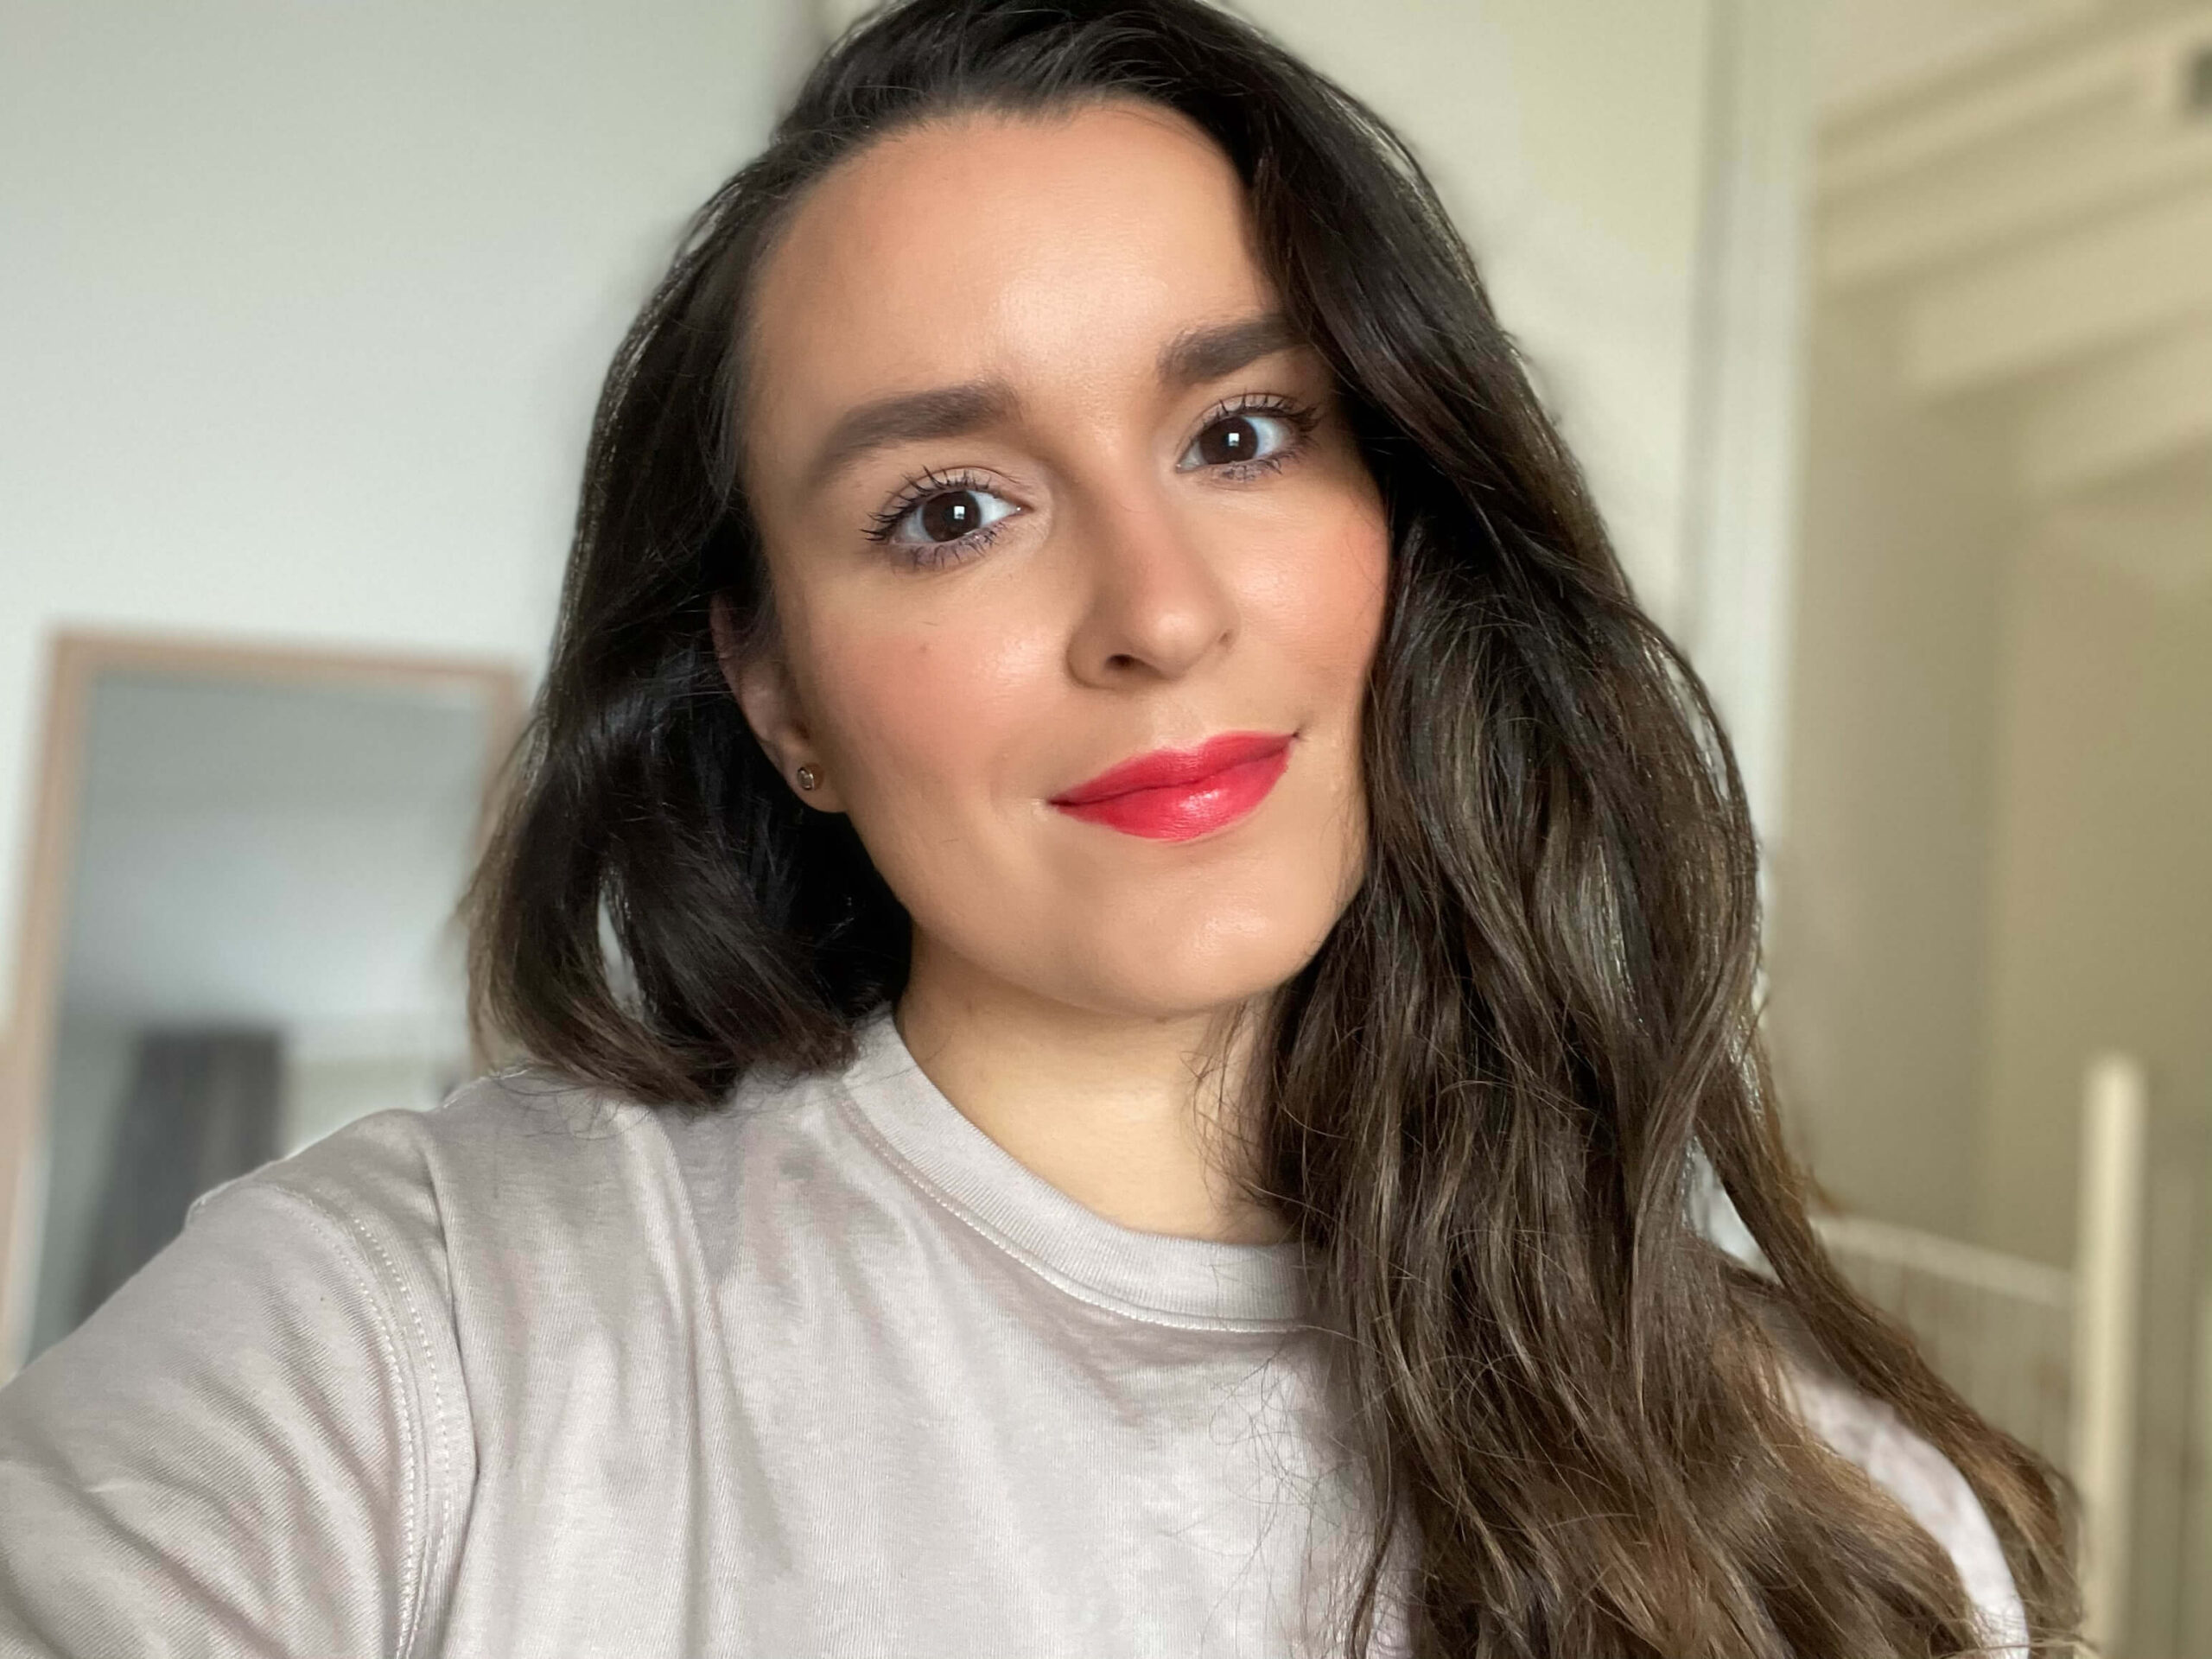 Review L’Oreal Infallible Fresh Wear foundation poeder - TikTok made me buy it!